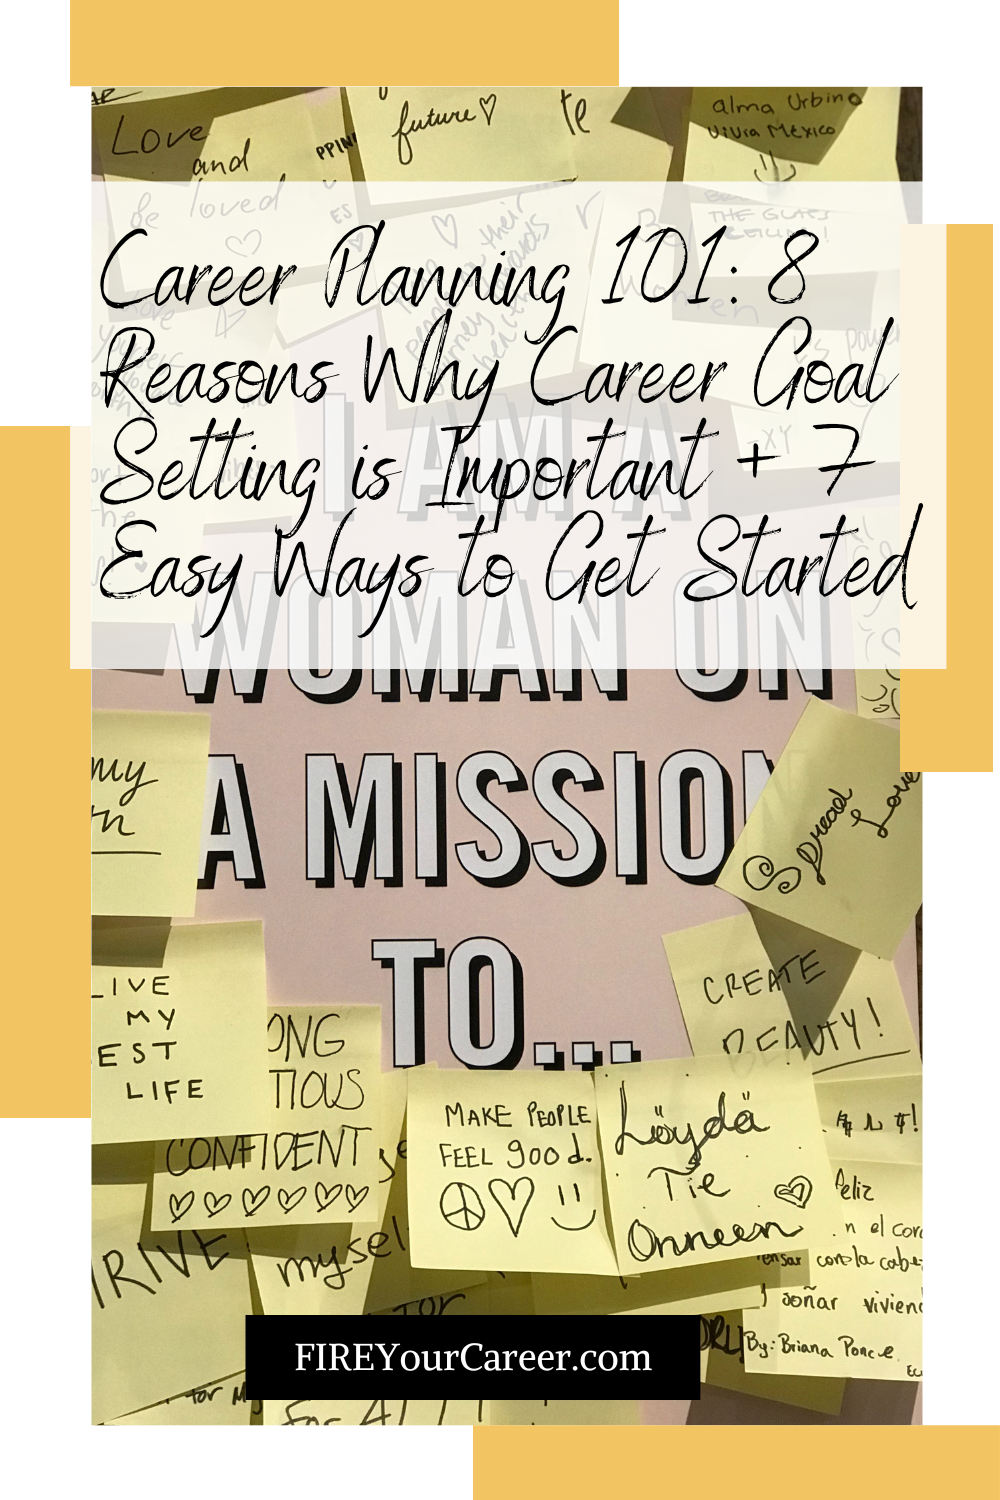 Career Planning 101 8 Reasons Why Career Goal Setting is Important + 7 Easy Ways to Get Started Pinterest